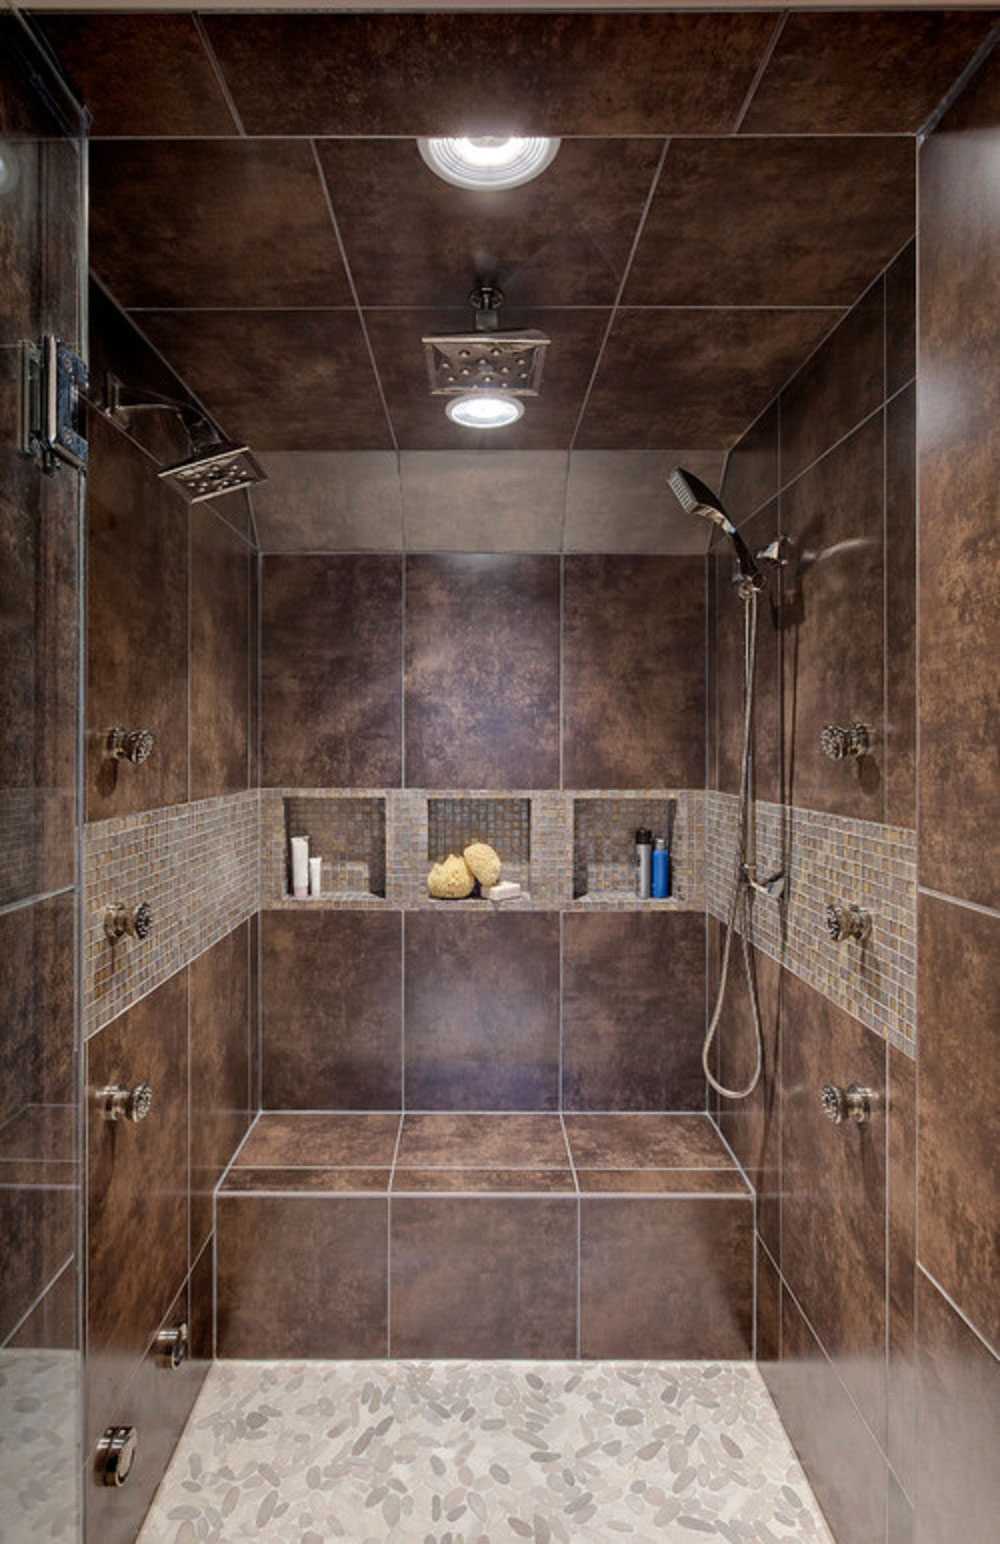 Bathroom Interior Brown Small Bathroom Interior Decorated With Brown Ceramic Tile Shower Designs In Contemporary Style For Bathroom Inspiration Bathroom Tile Shower Designs In Marble And Granite Types Represent The Best Natural Textures